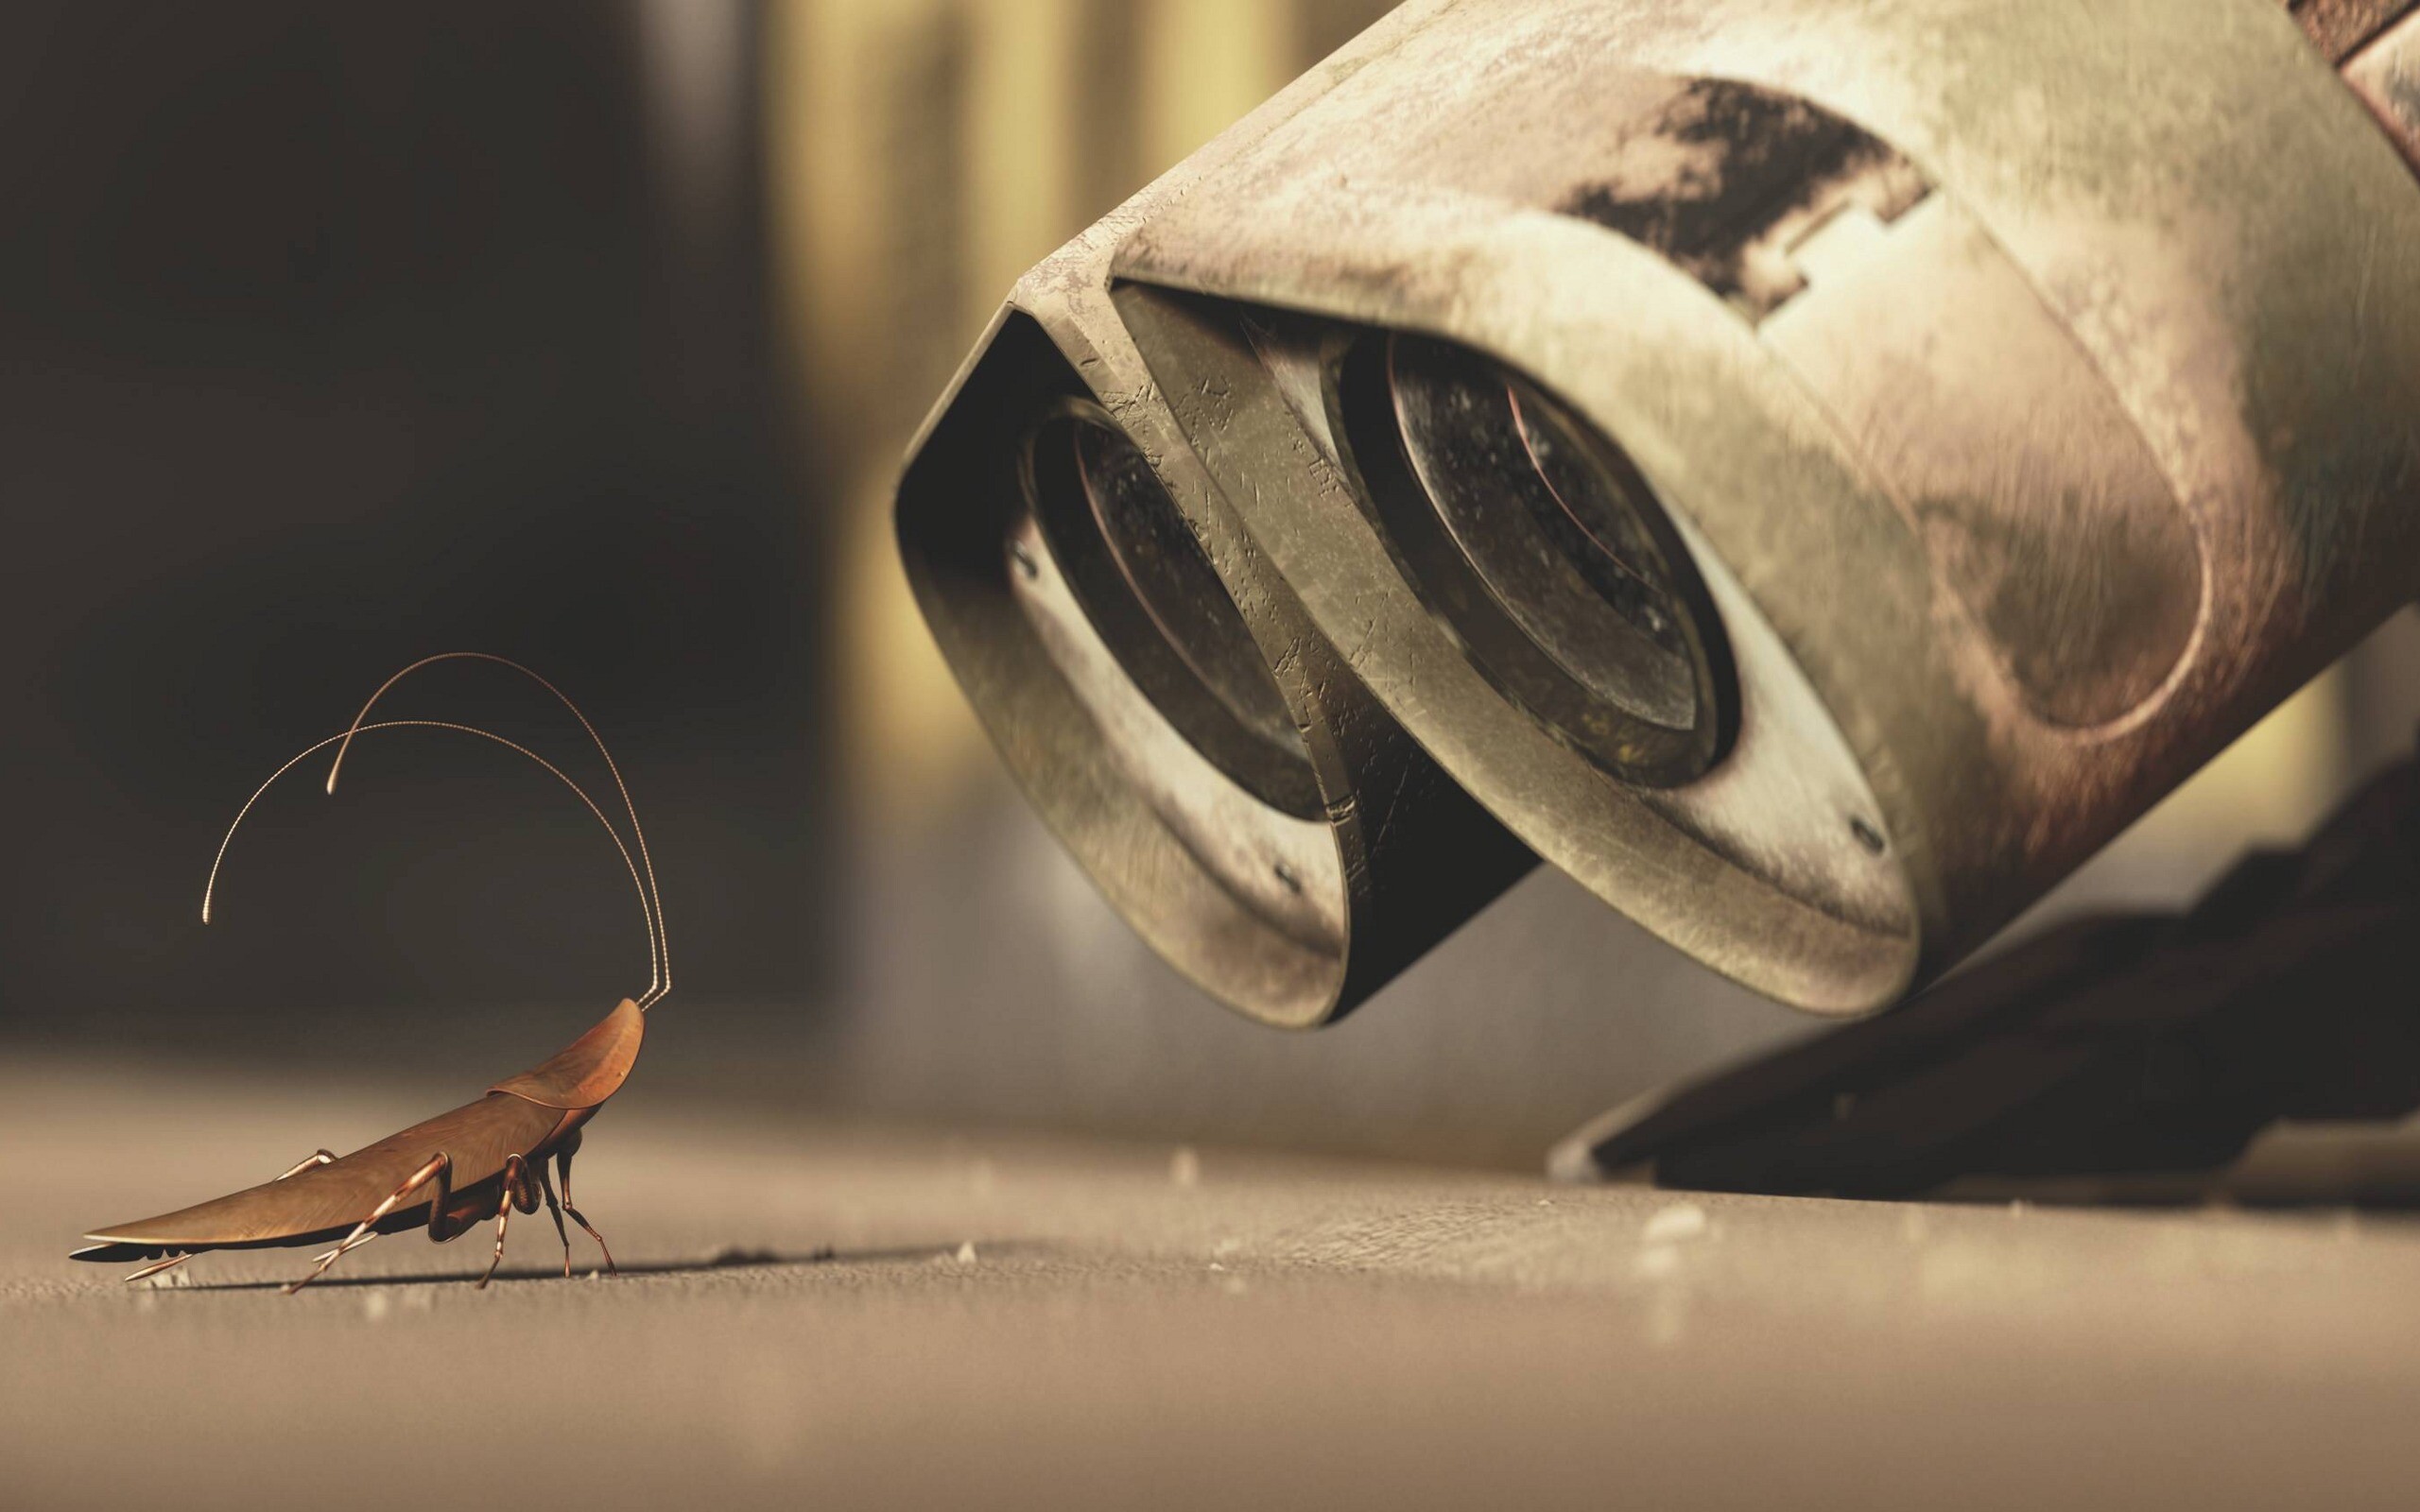 WALL·E: In 2016 it was voted 29th among 100 films considered the best of the 21st century by 117 film critics from around the world. 2560x1600 HD Background.